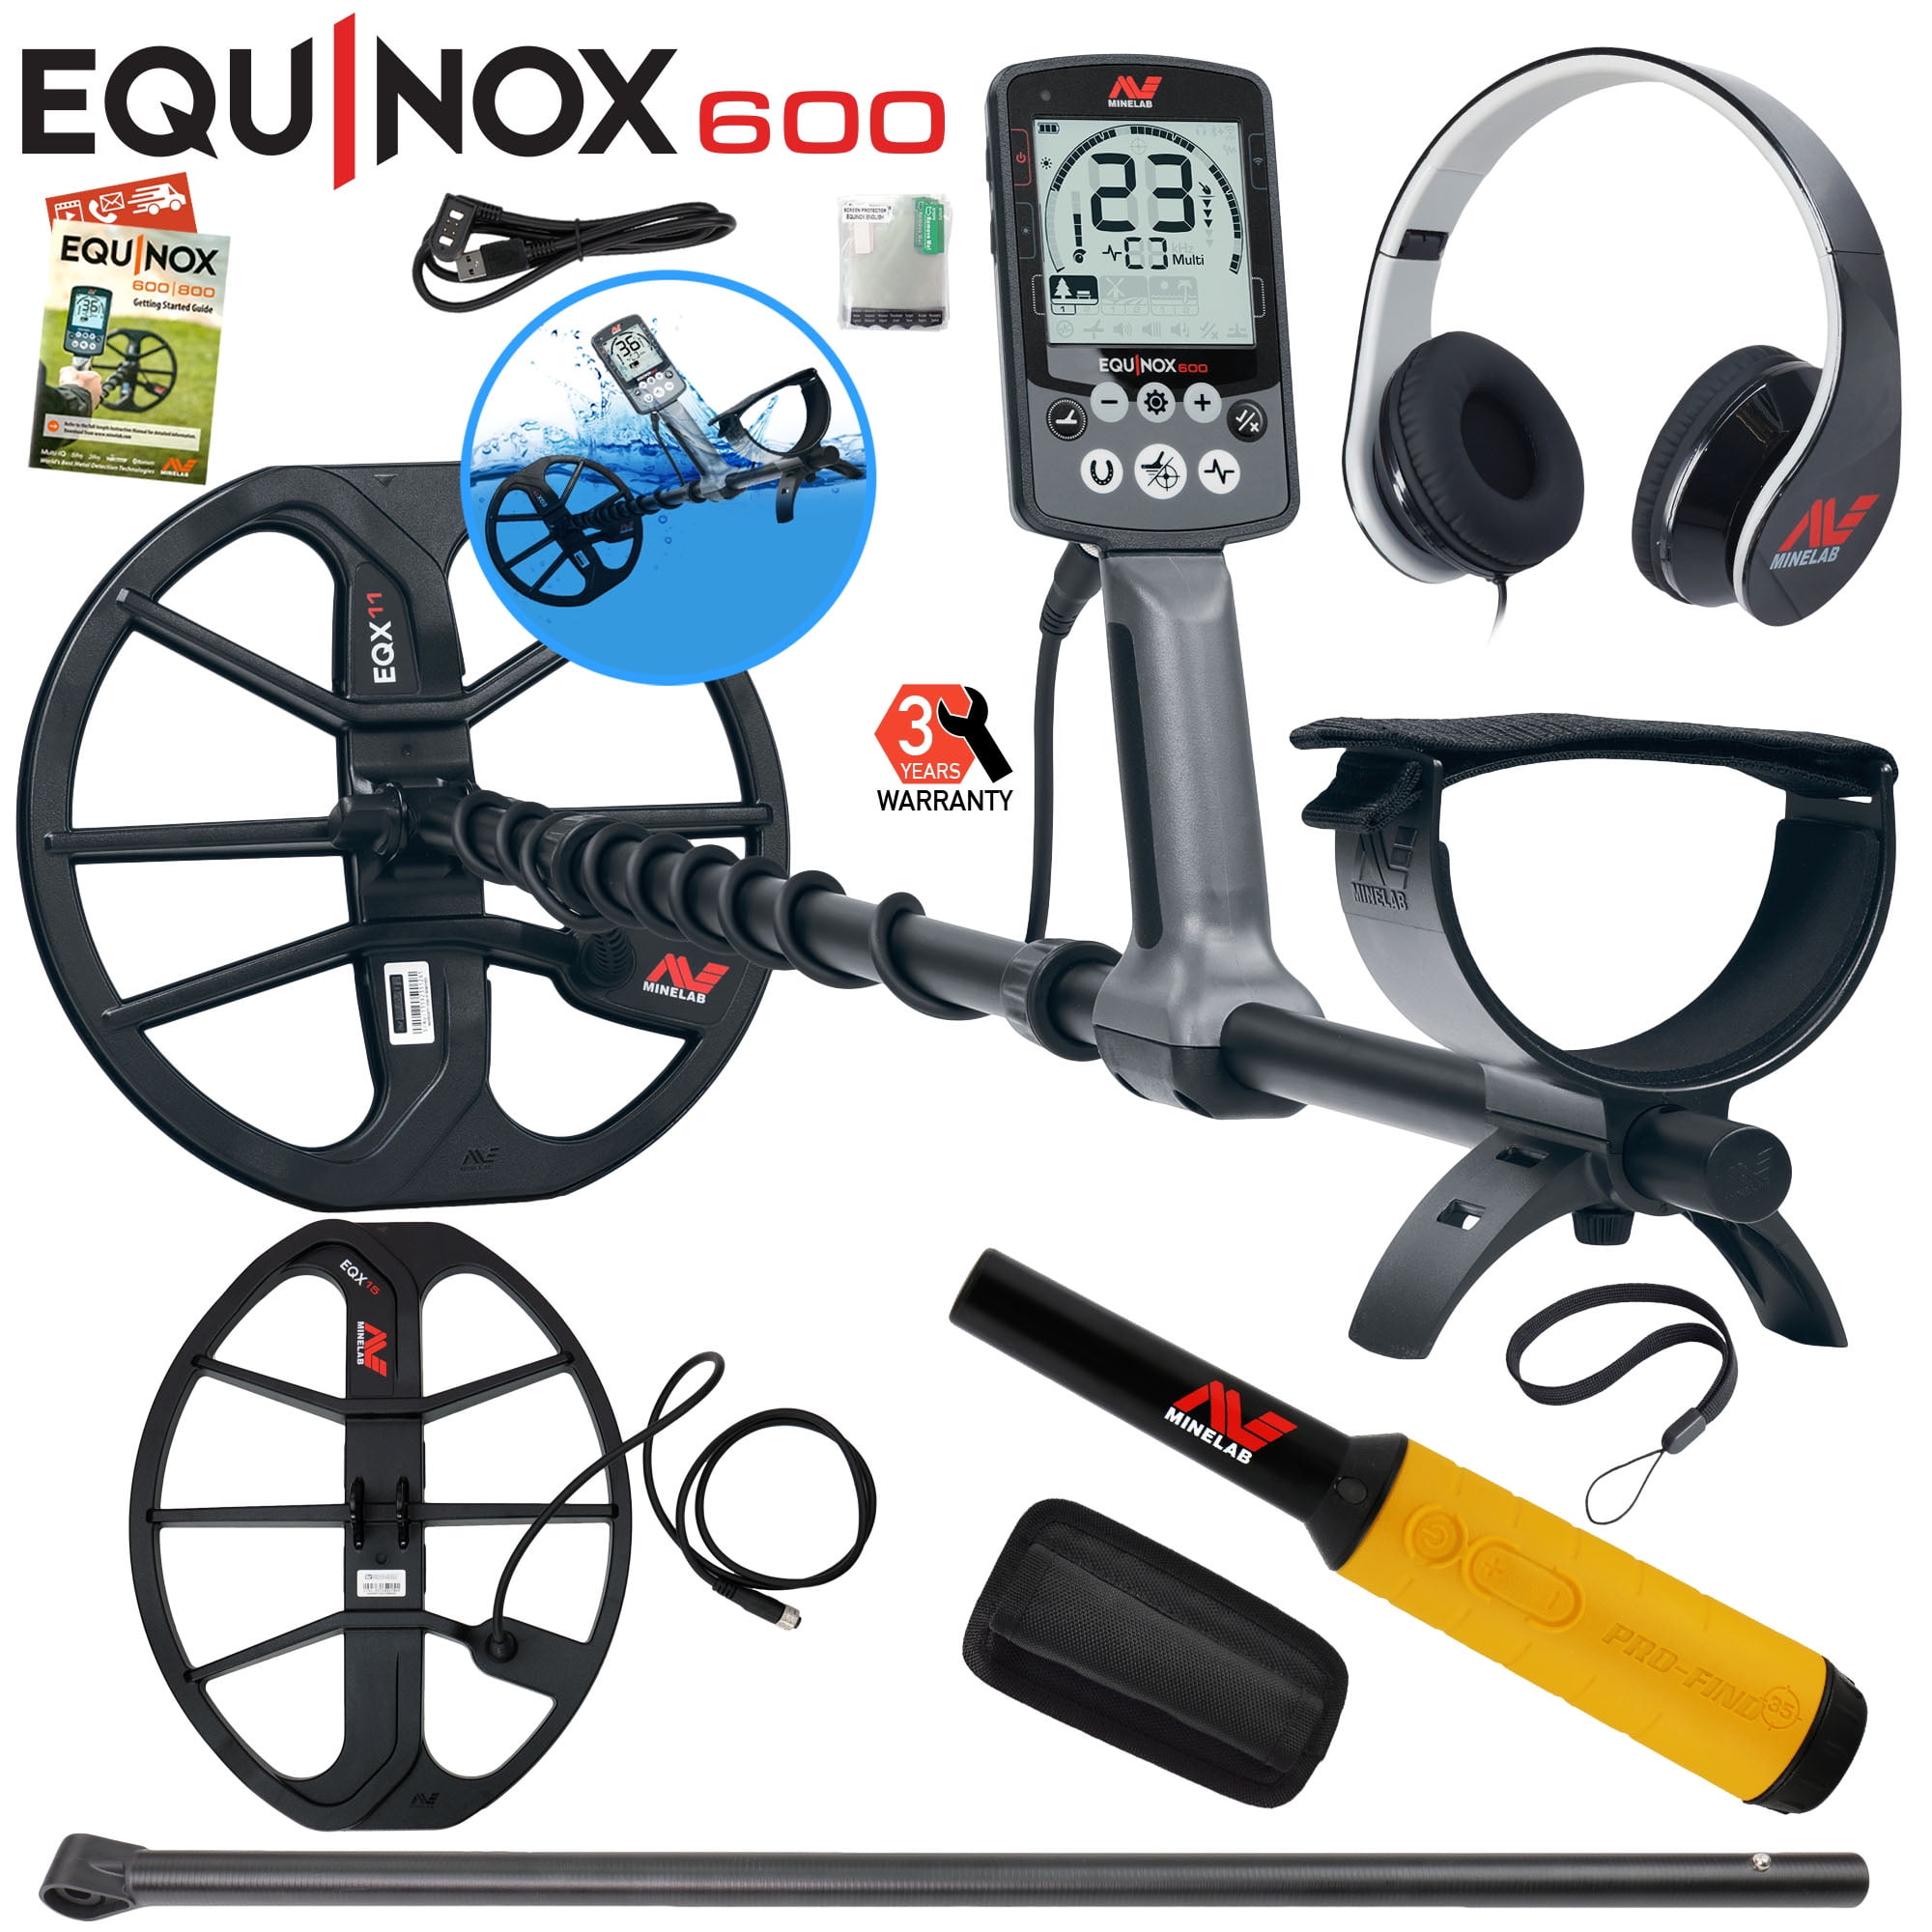 Minelab Equinox 800 Metal Detector with 15" Coil and Pro-Find 35 Pinpointer